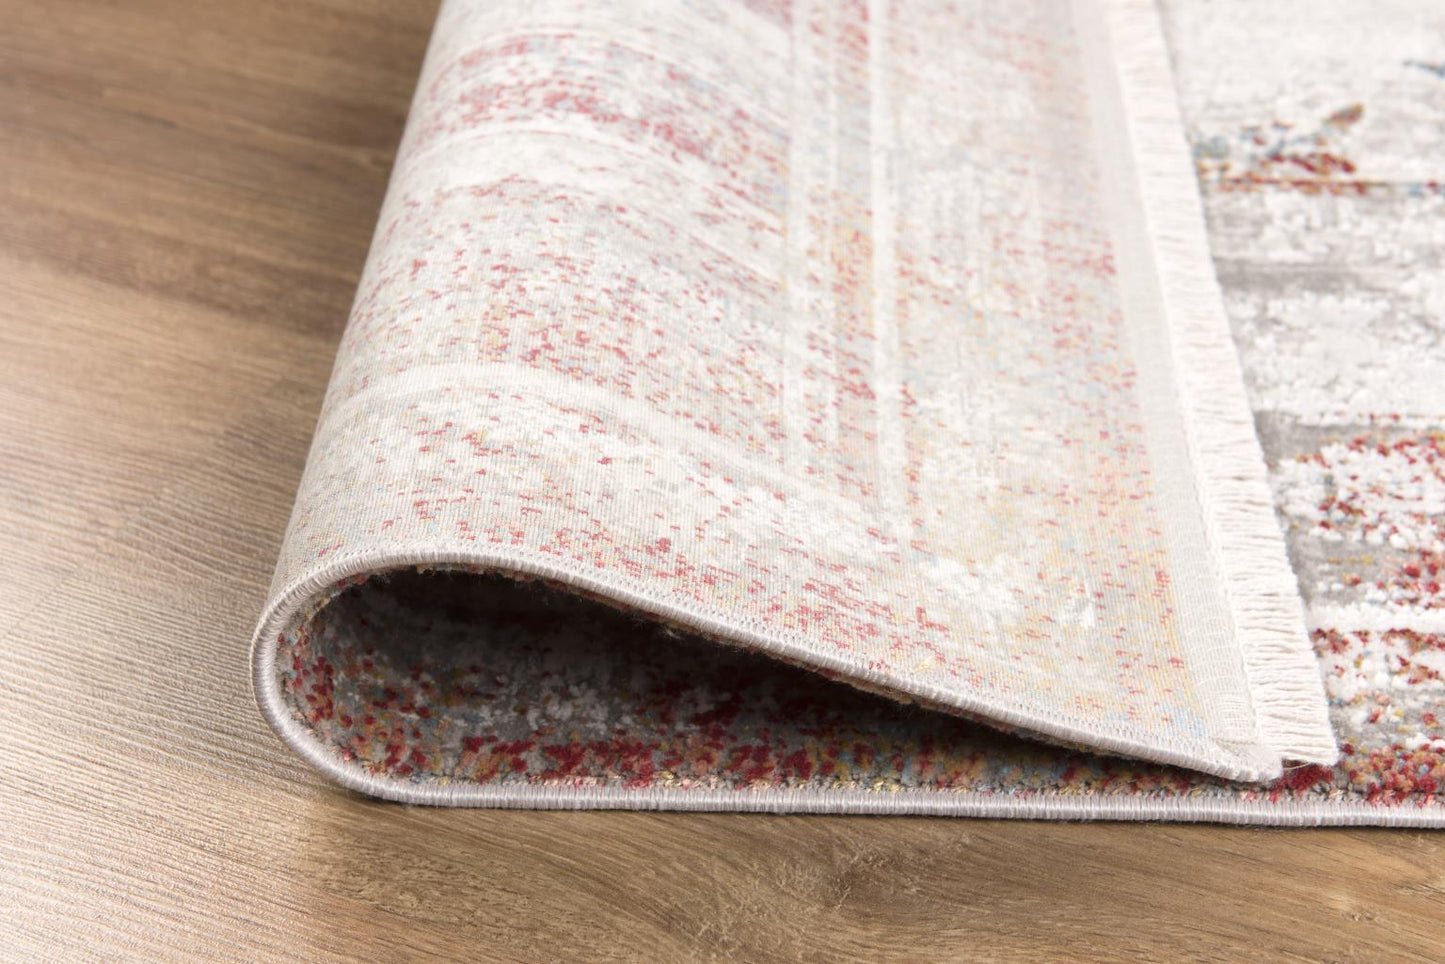 ANDROS RUG COLLECTION (AD05) (Grey or Red/Multi)